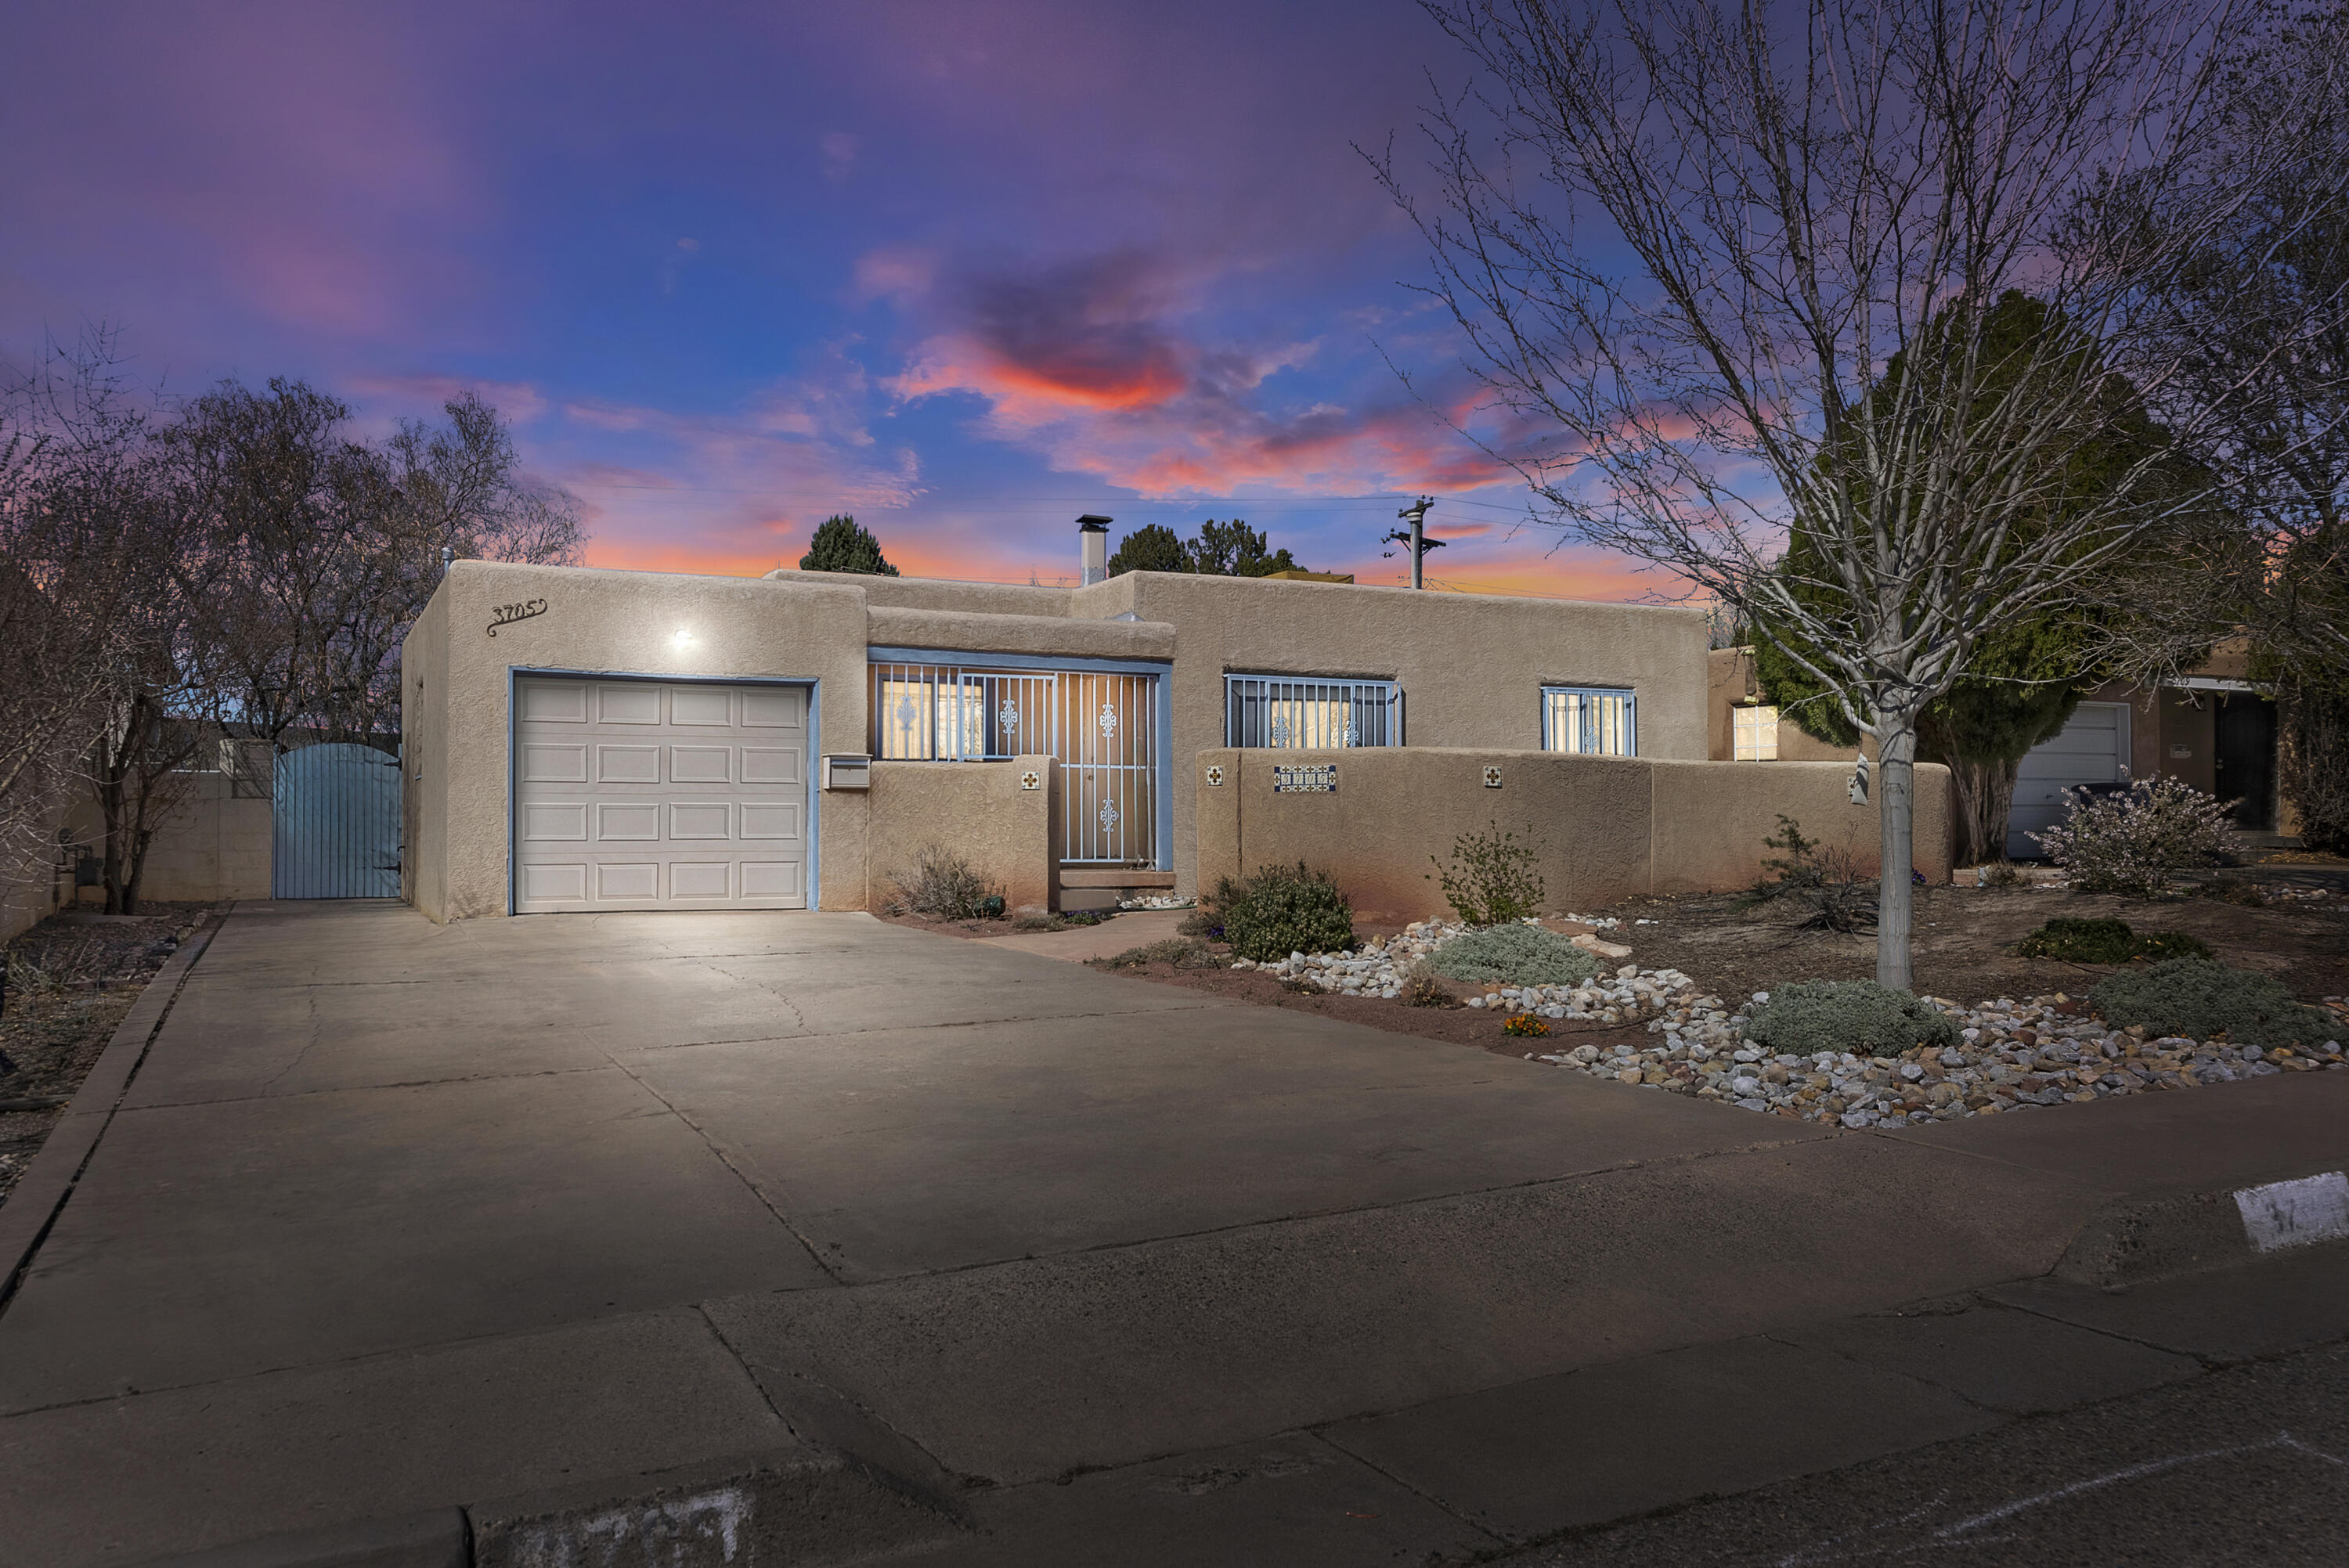 This one-story house near the University of New Mexico is a classic example of mid-20th-century architecture, built in 1952. The home spans roughly 1300 square feet and features a blend of traditional charm and modern convenience, suitable for those who appreciate the character of older homes coupled with the benefits of living close to a university campus.As you enter the property, you'll be greeted by a quaint exterior that reflects the design aesthetic of the early 1950s, with mature landscaping that hints at the home's established history. An attached one-car garage provides off-street parking, an appreciated feature in the university area where parking can be a premium.Stepping inside, the house reveals an open floor plan connecting the living and